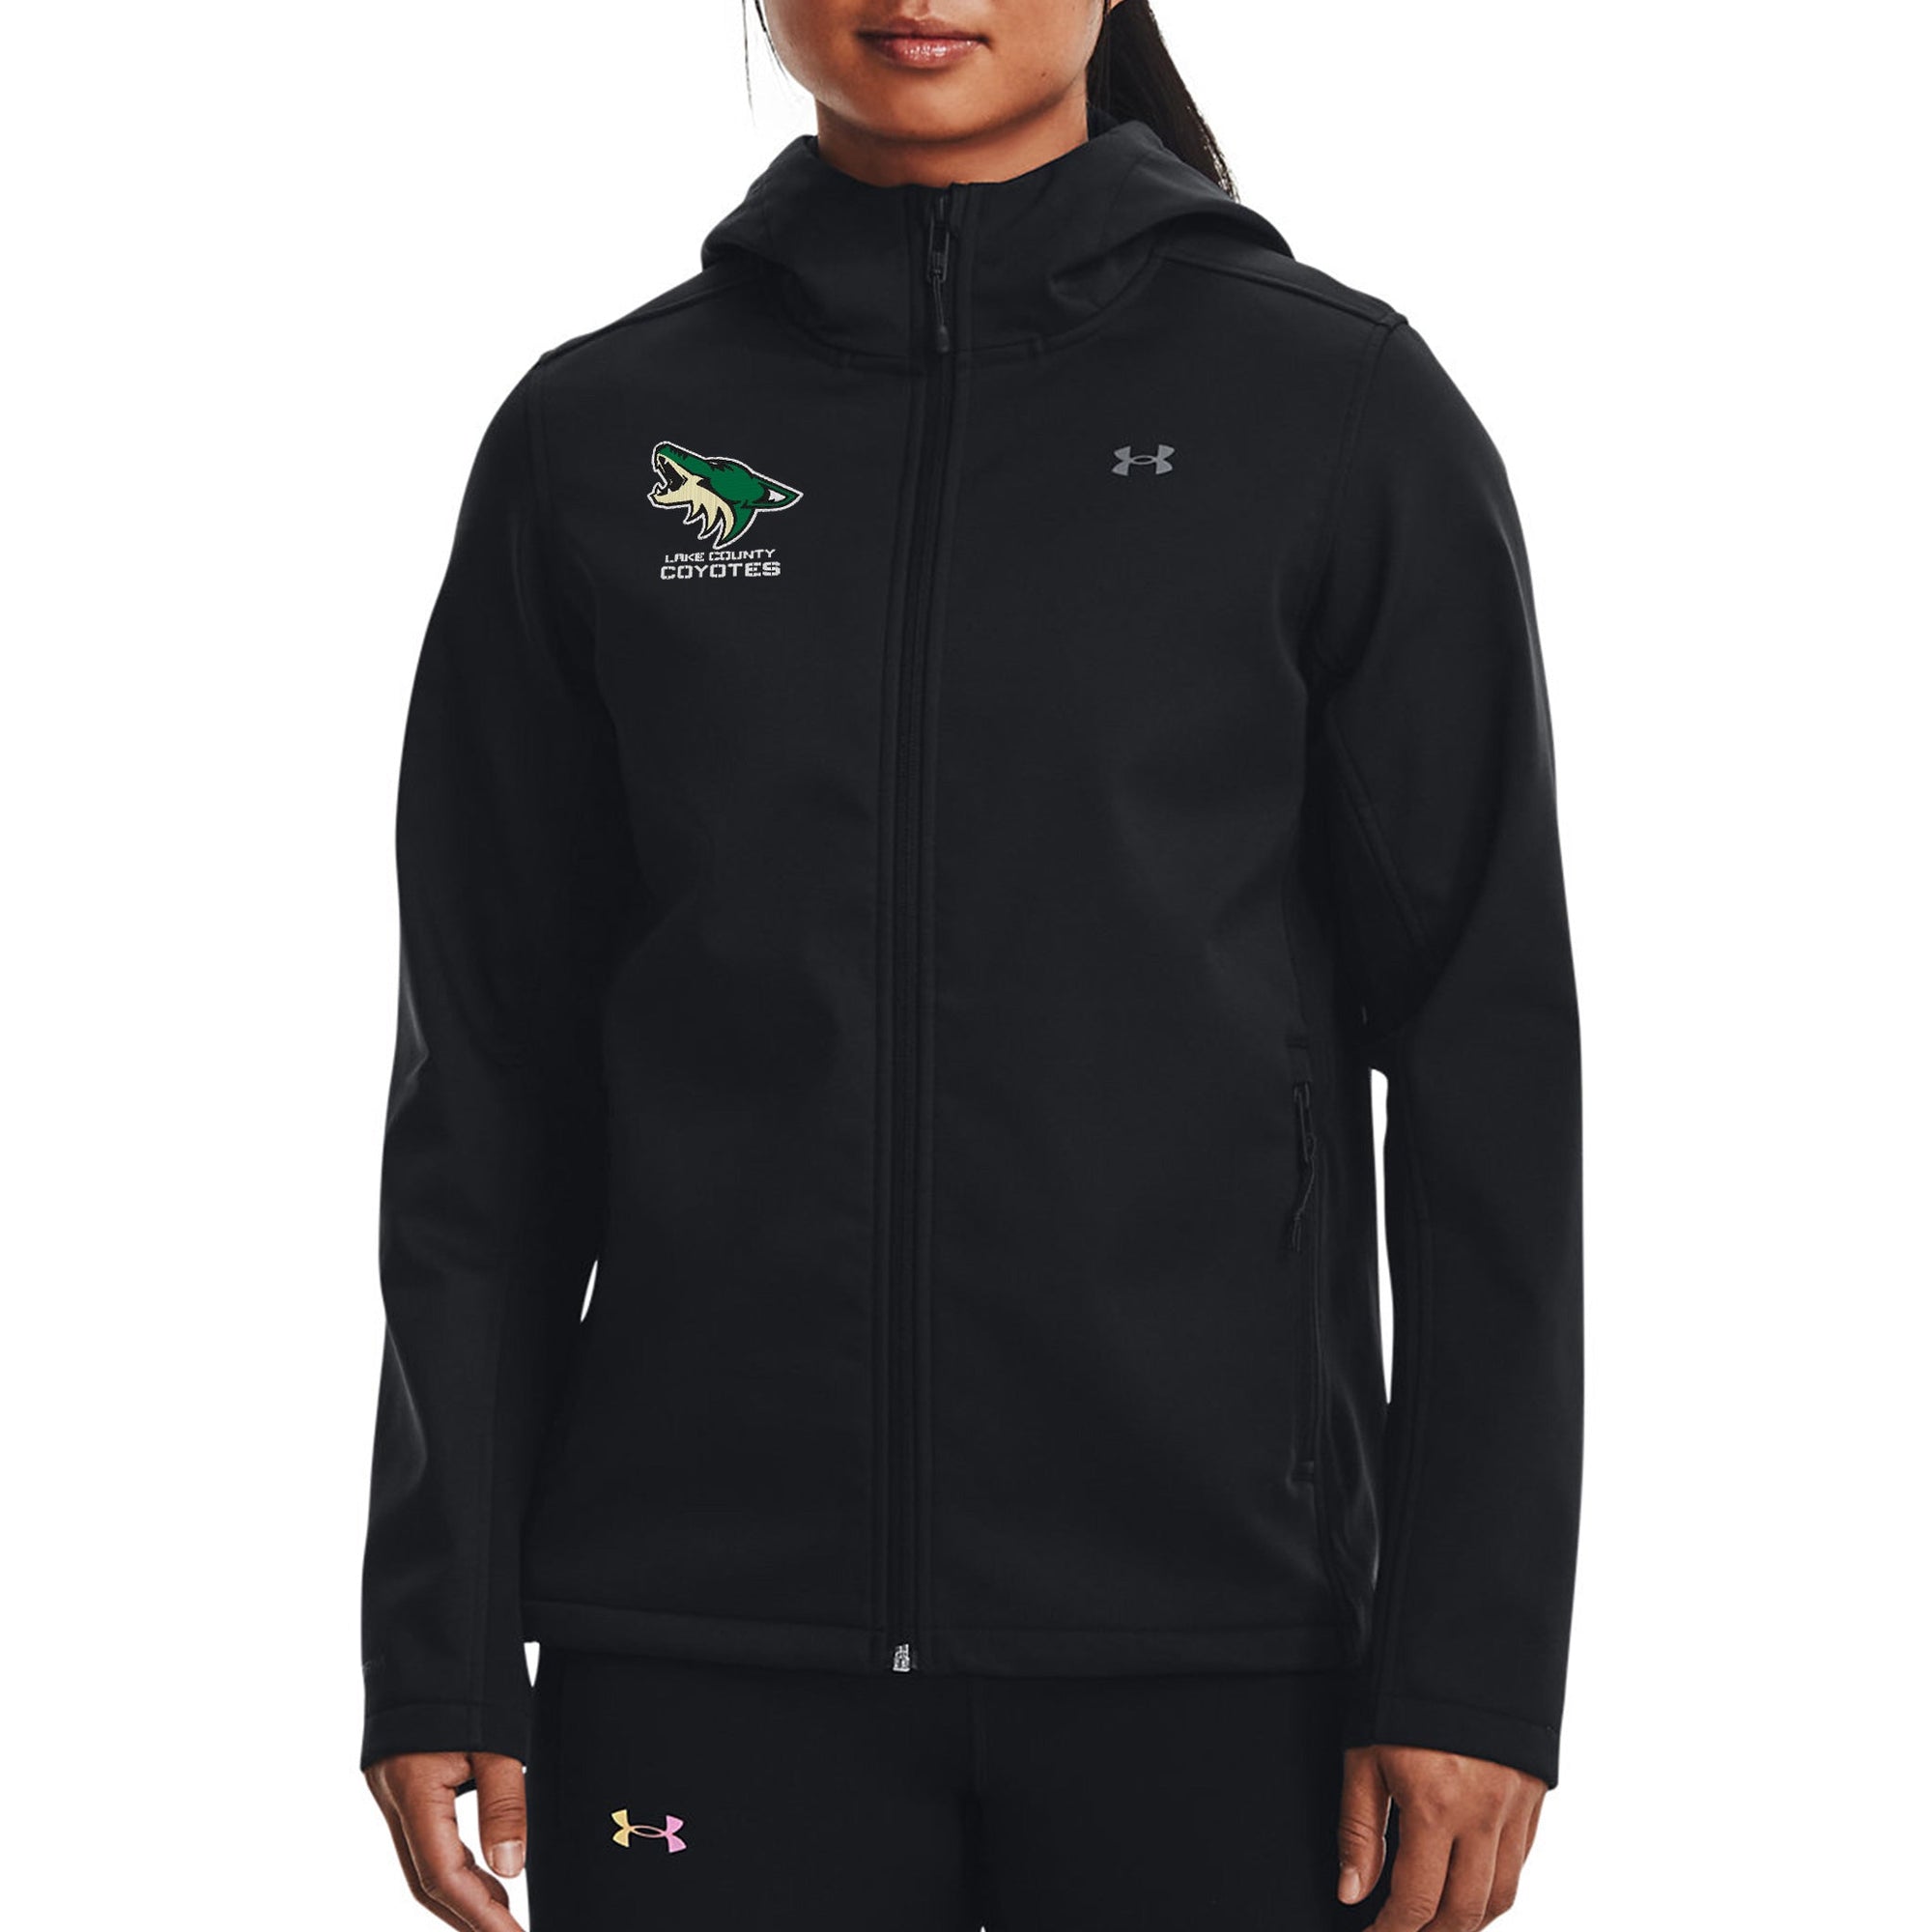 Rugby Imports Lake County Women's Coldgear Hooded Infrared Jacket